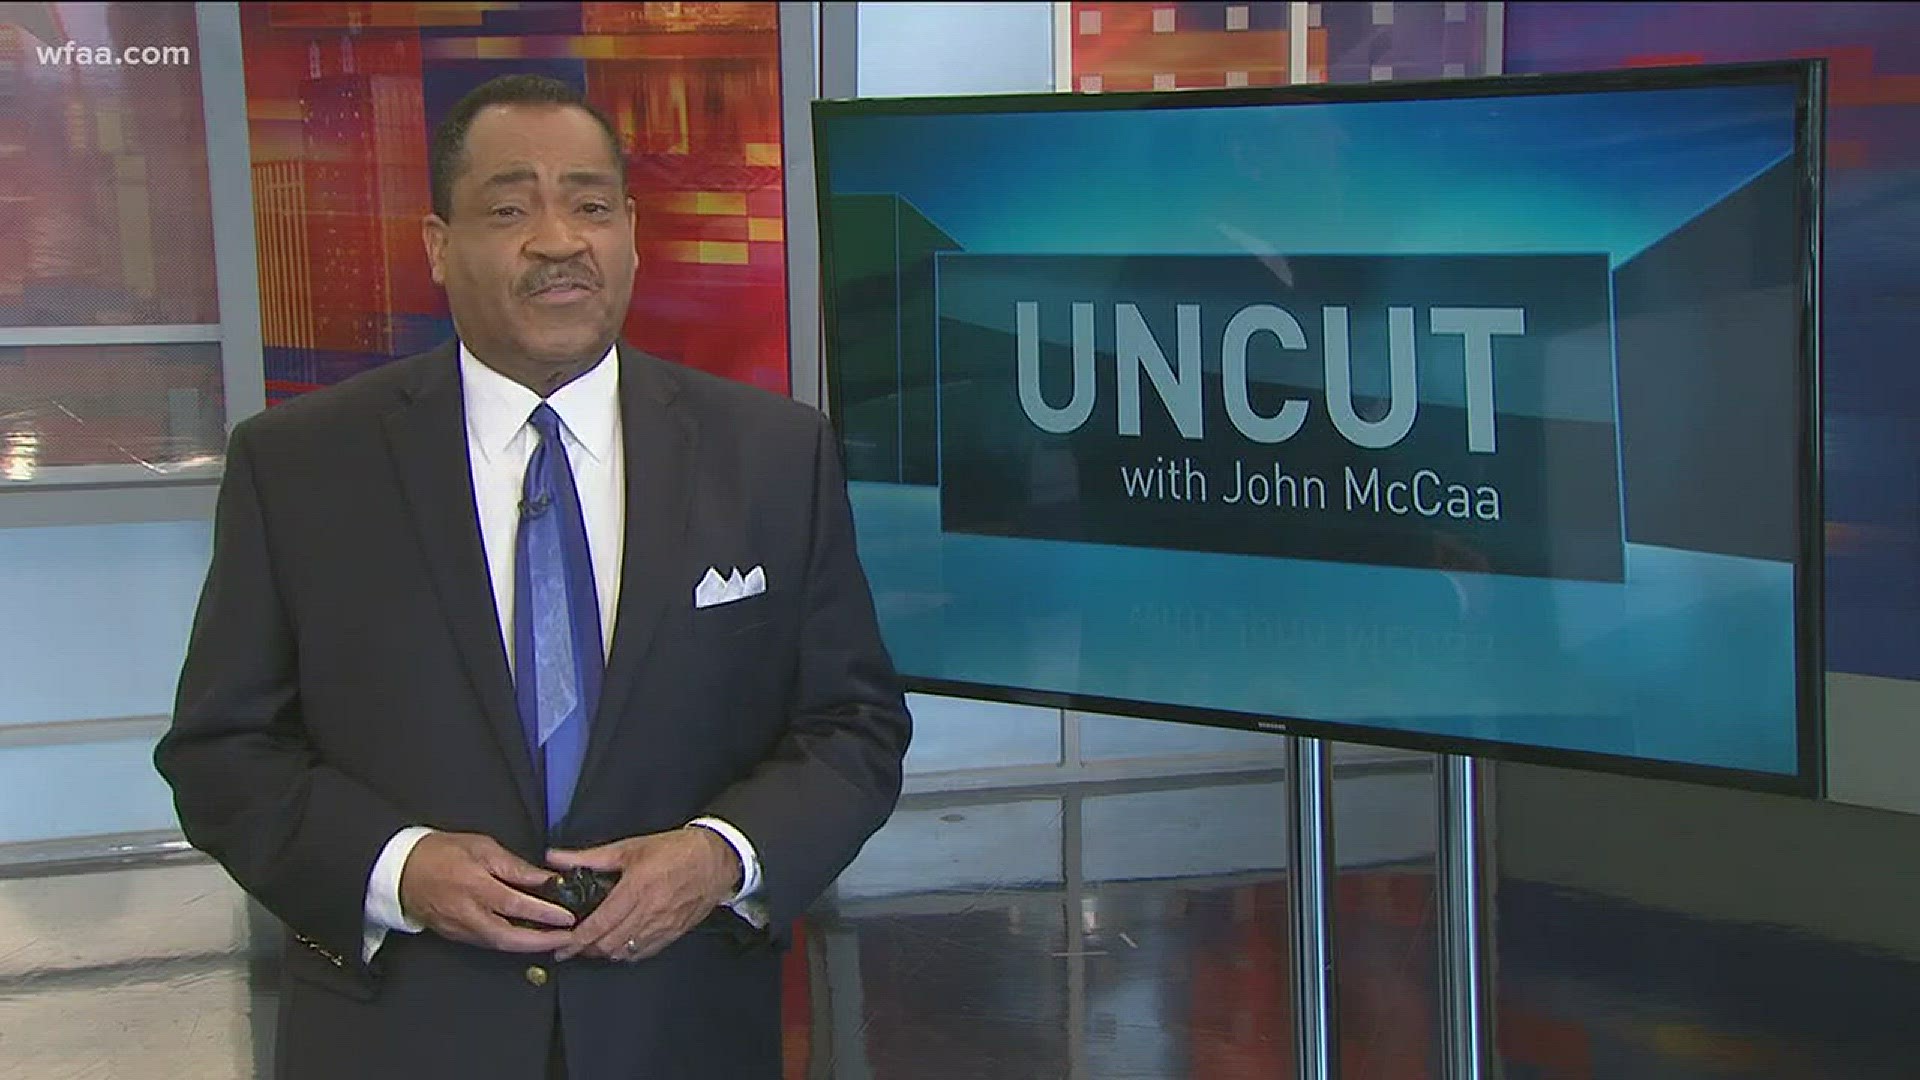 Uncut with John McCaa: Rental bikes scattered all over sidewalks